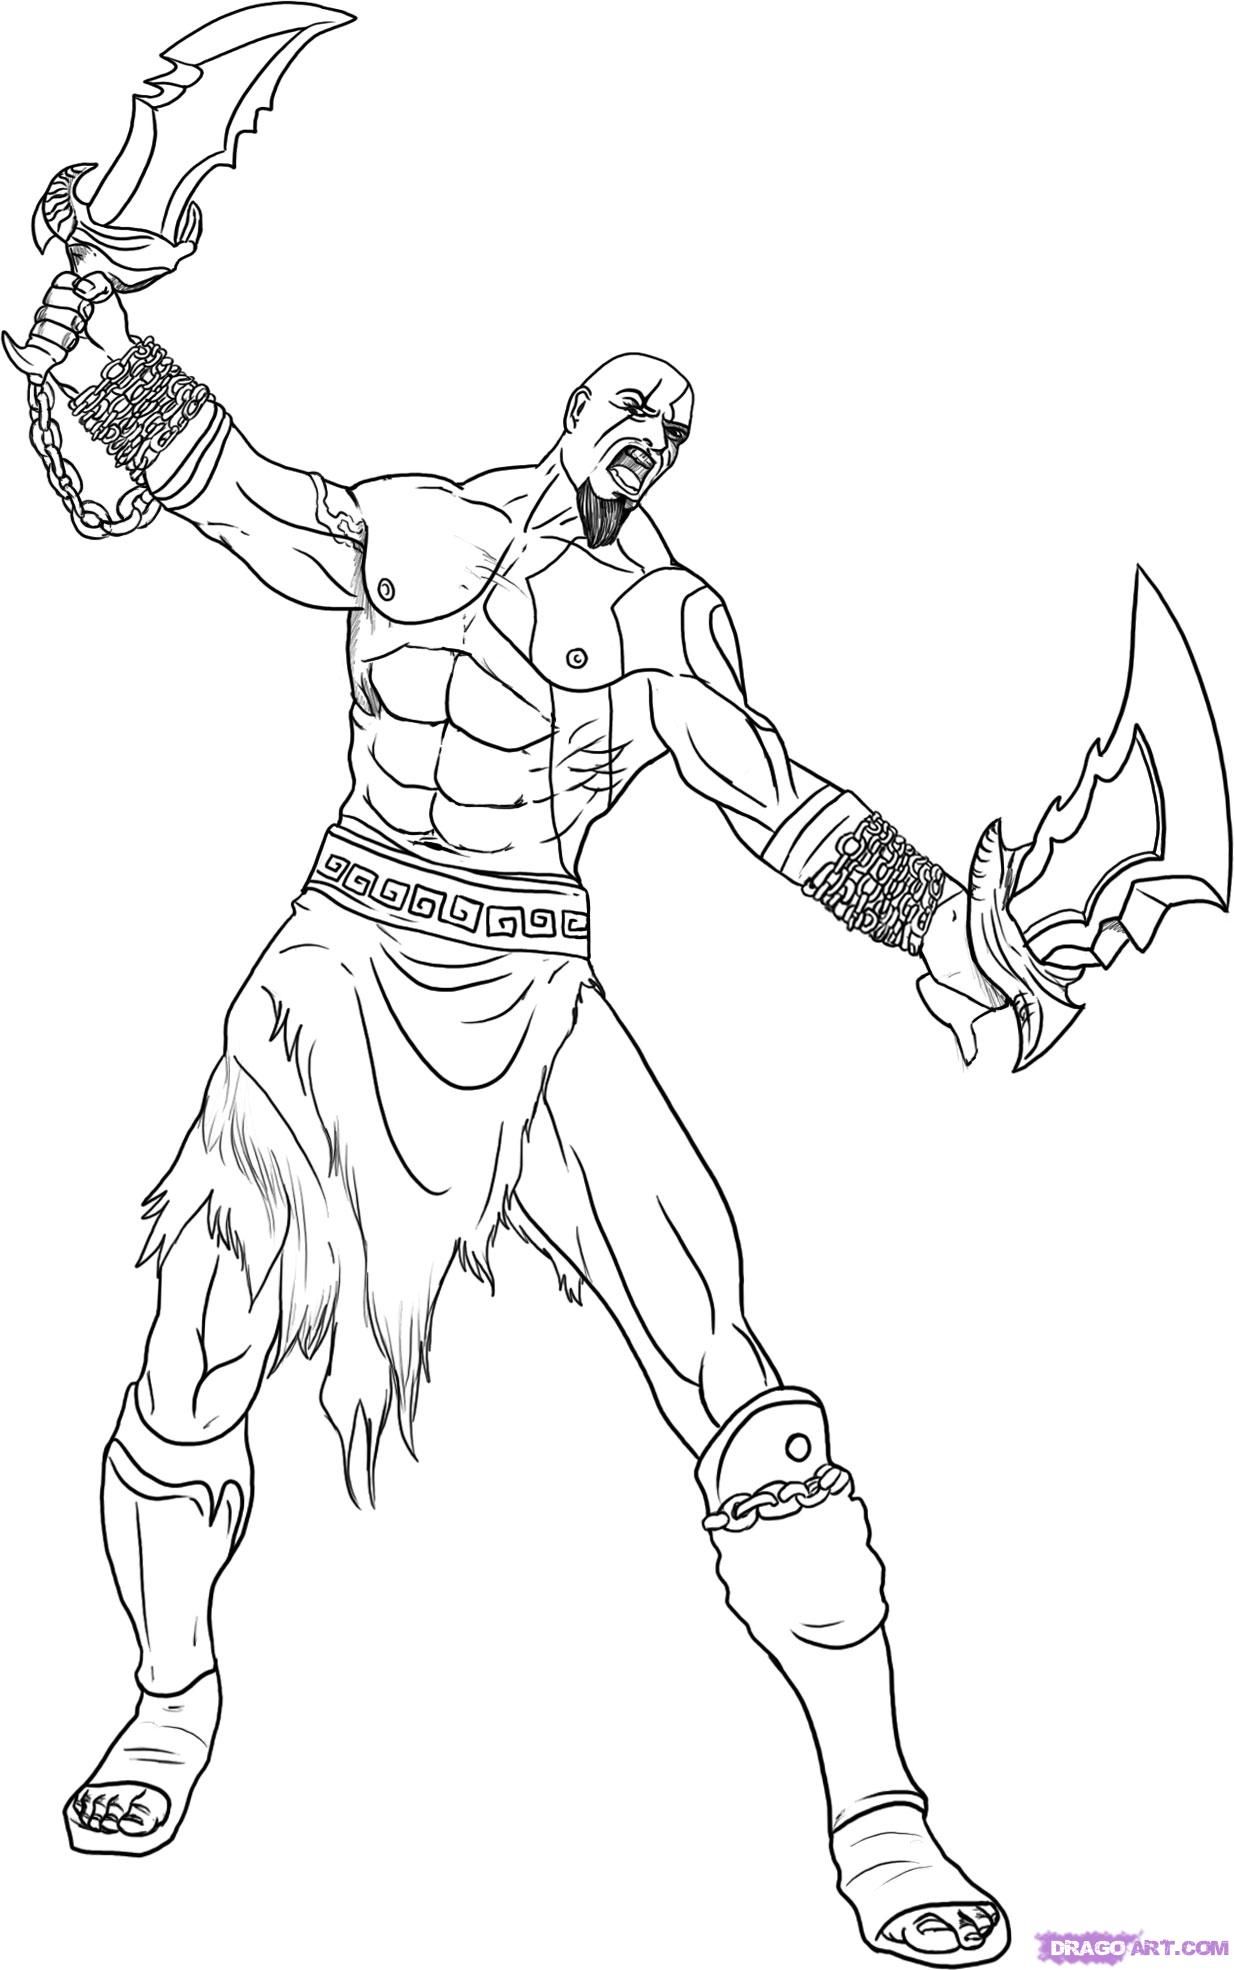 amazing Kratos God Of War Coloring Pages | Kratos god of war, God of war,  Kratos desenho